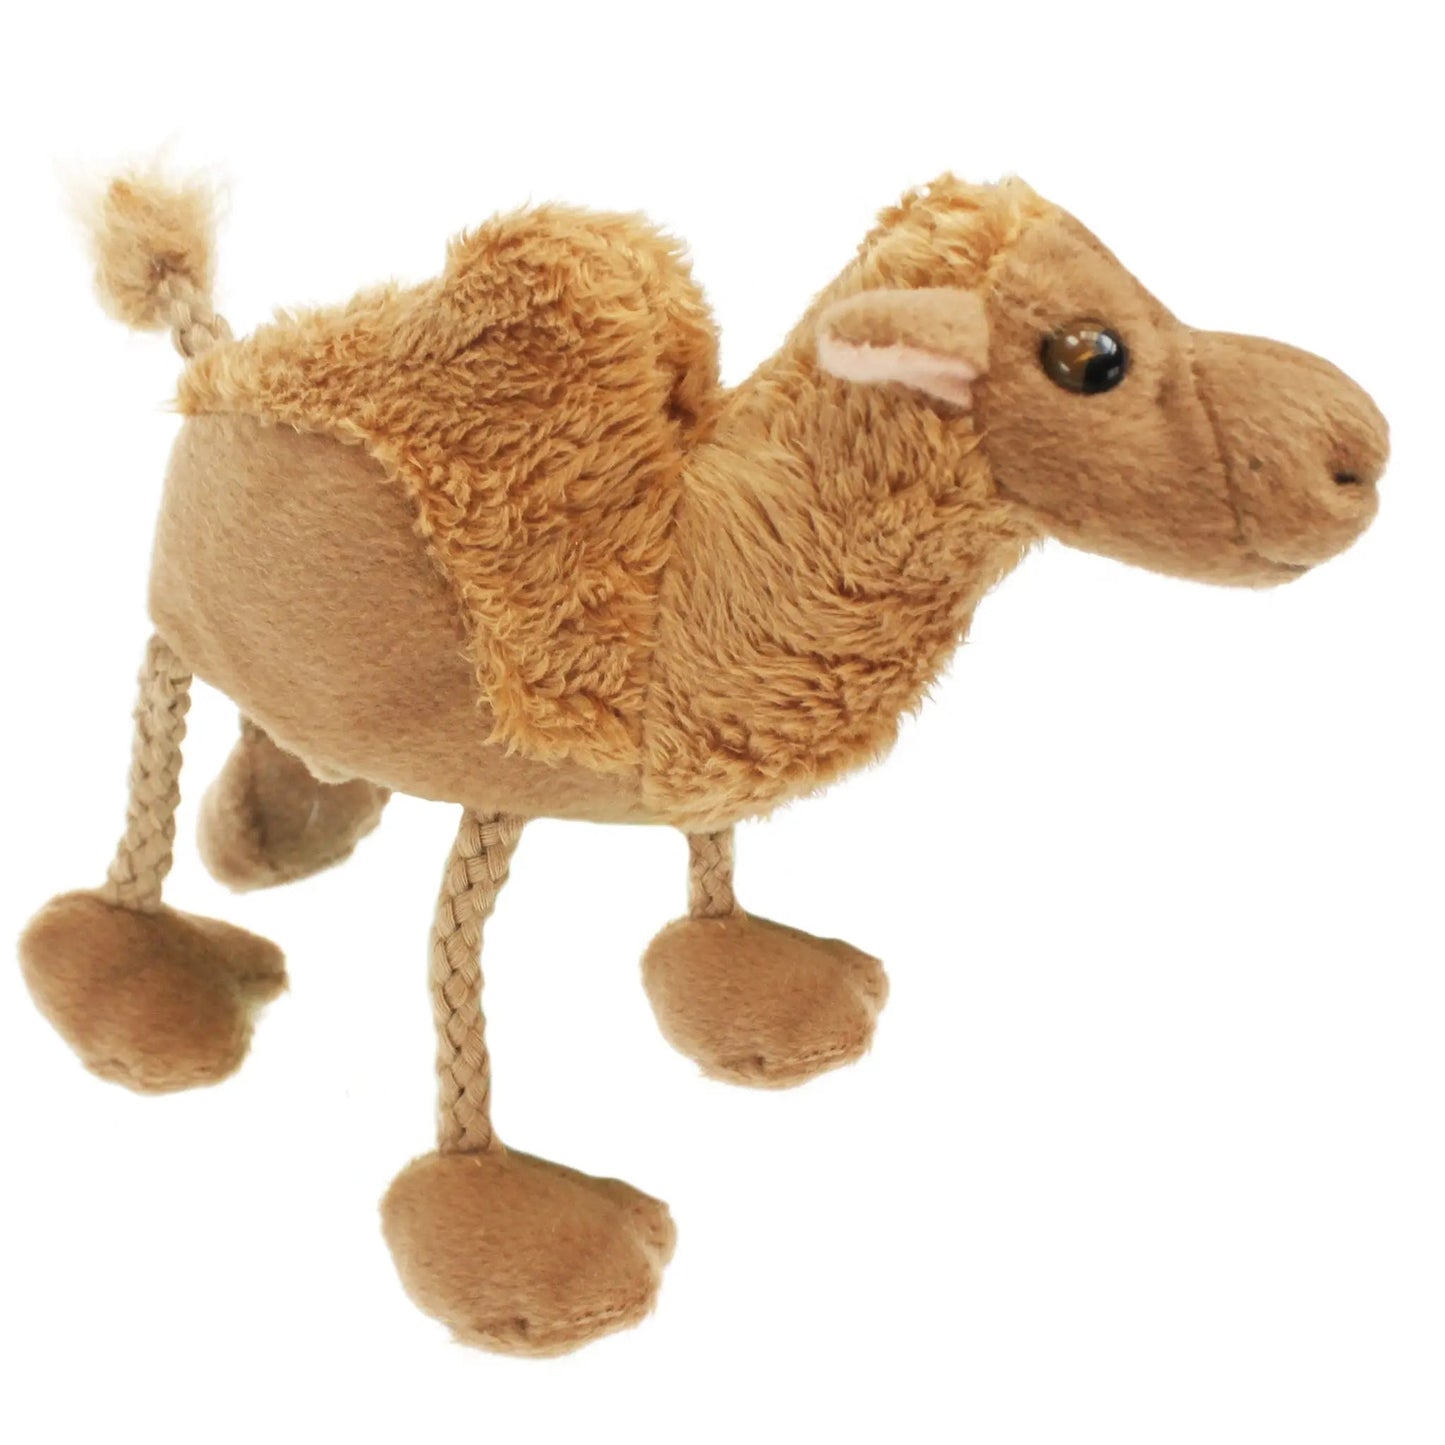 Camel Finger Puppet - The Puppet Company - The Forgotten Toy Shop